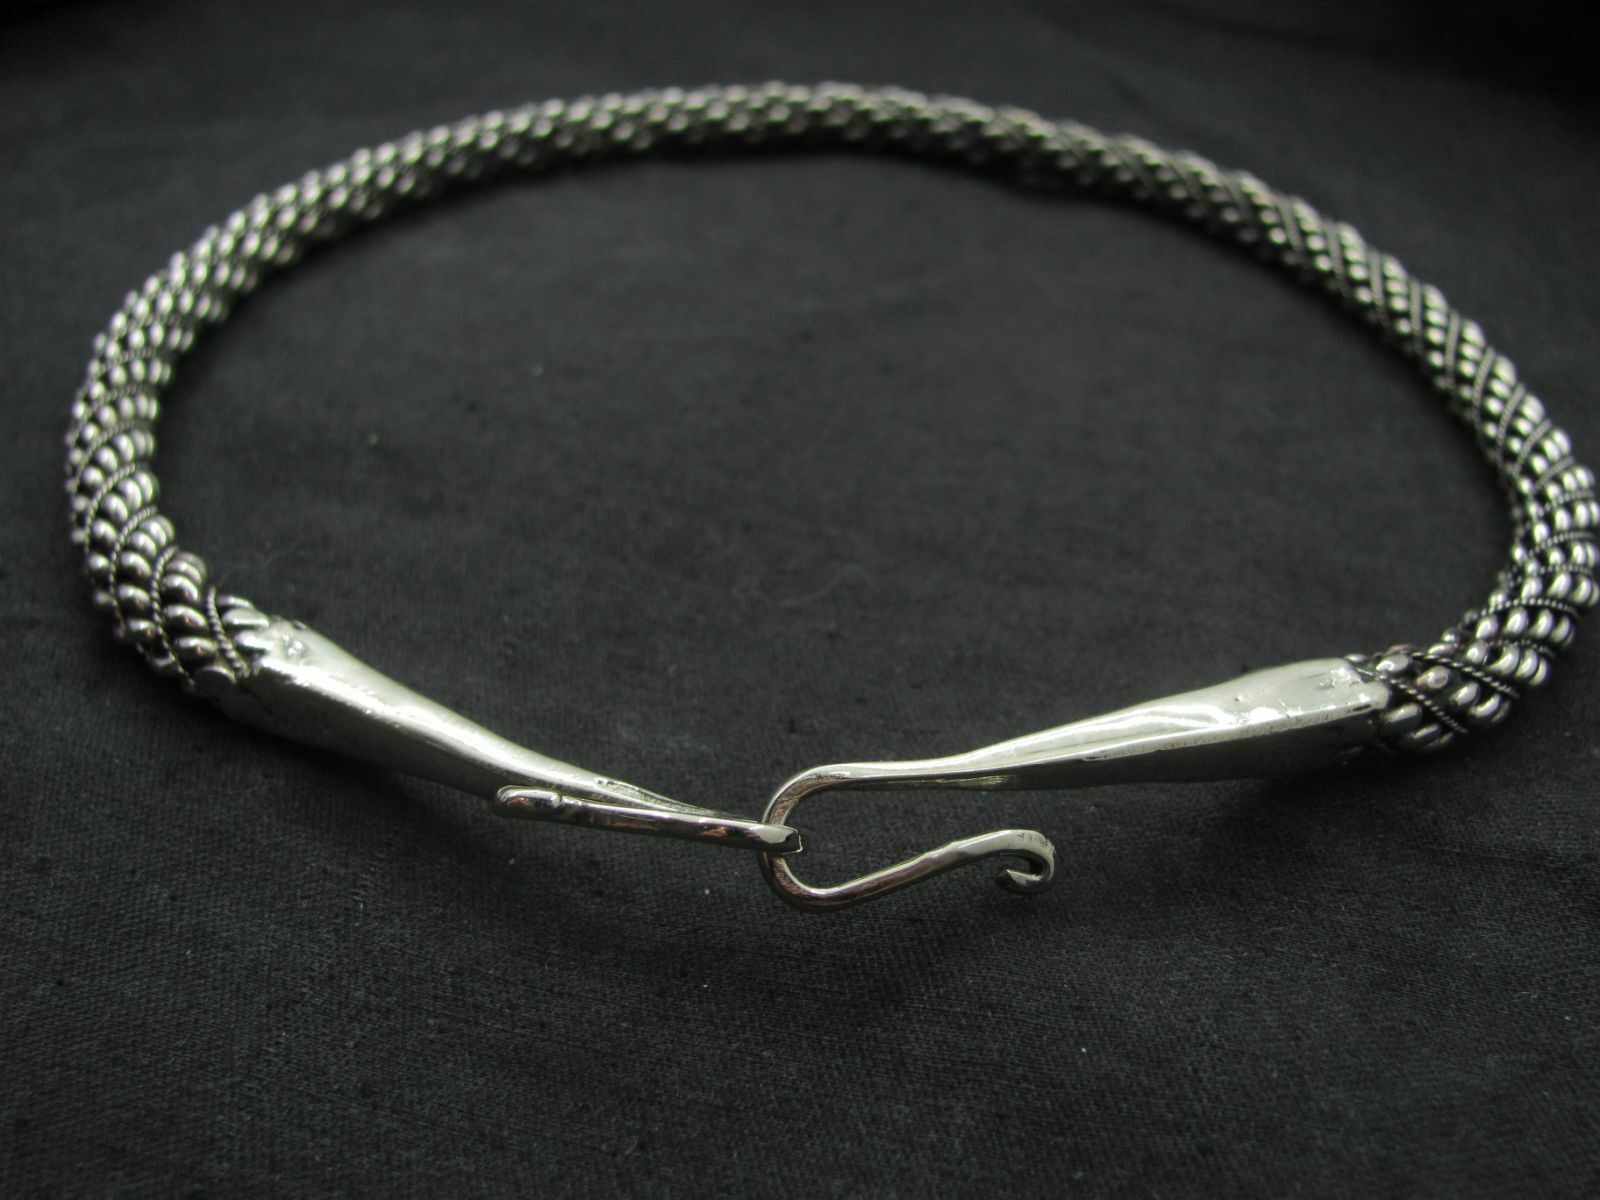 Handmade Viking king twisted torque, neck ring, made from nickel-silver